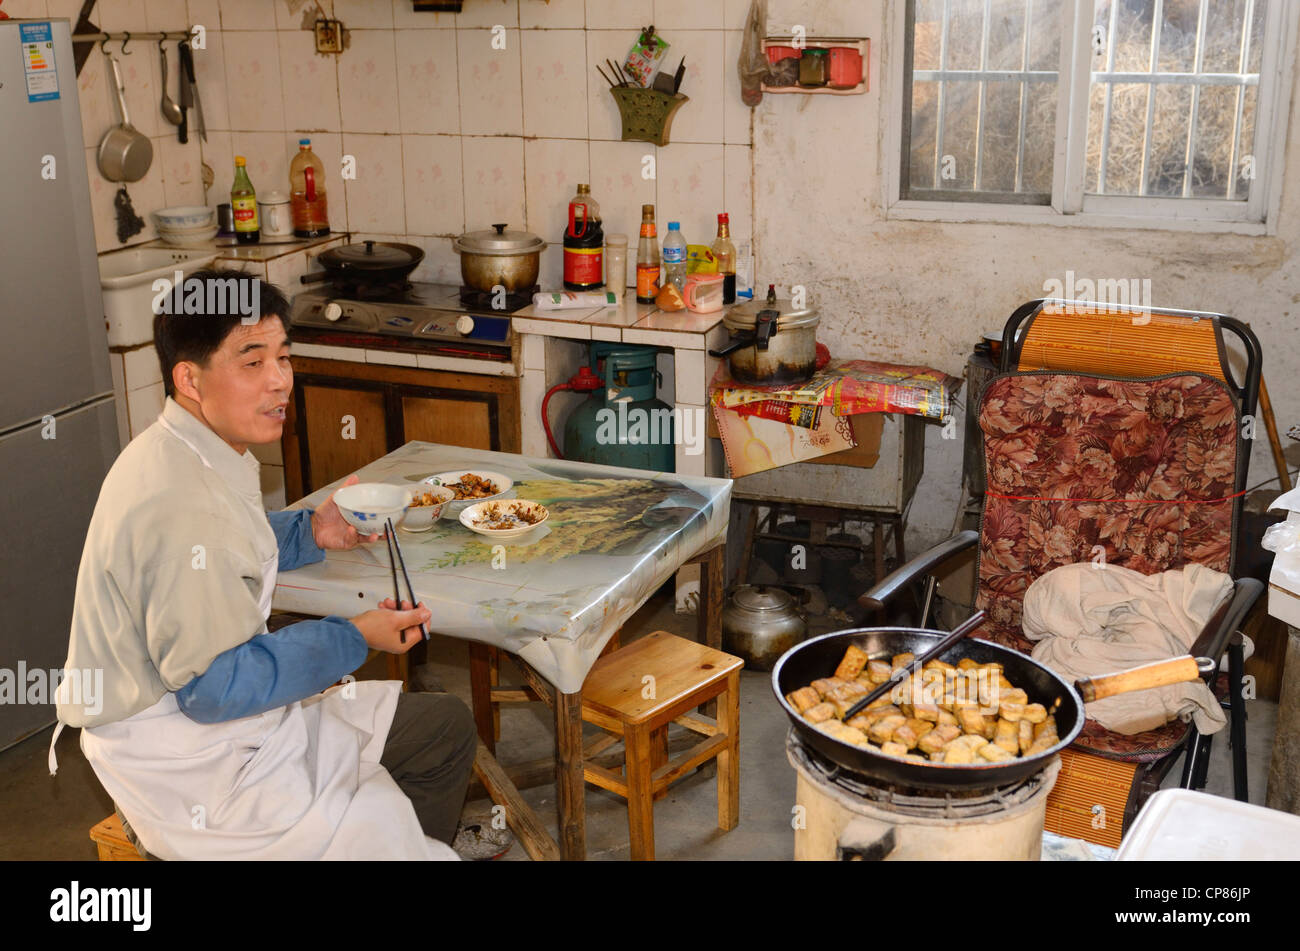 Chinese tofu worker eating lunch in the kitchen in ancient Chengkan village Huangshan Peoples Republic of China Stock Photo